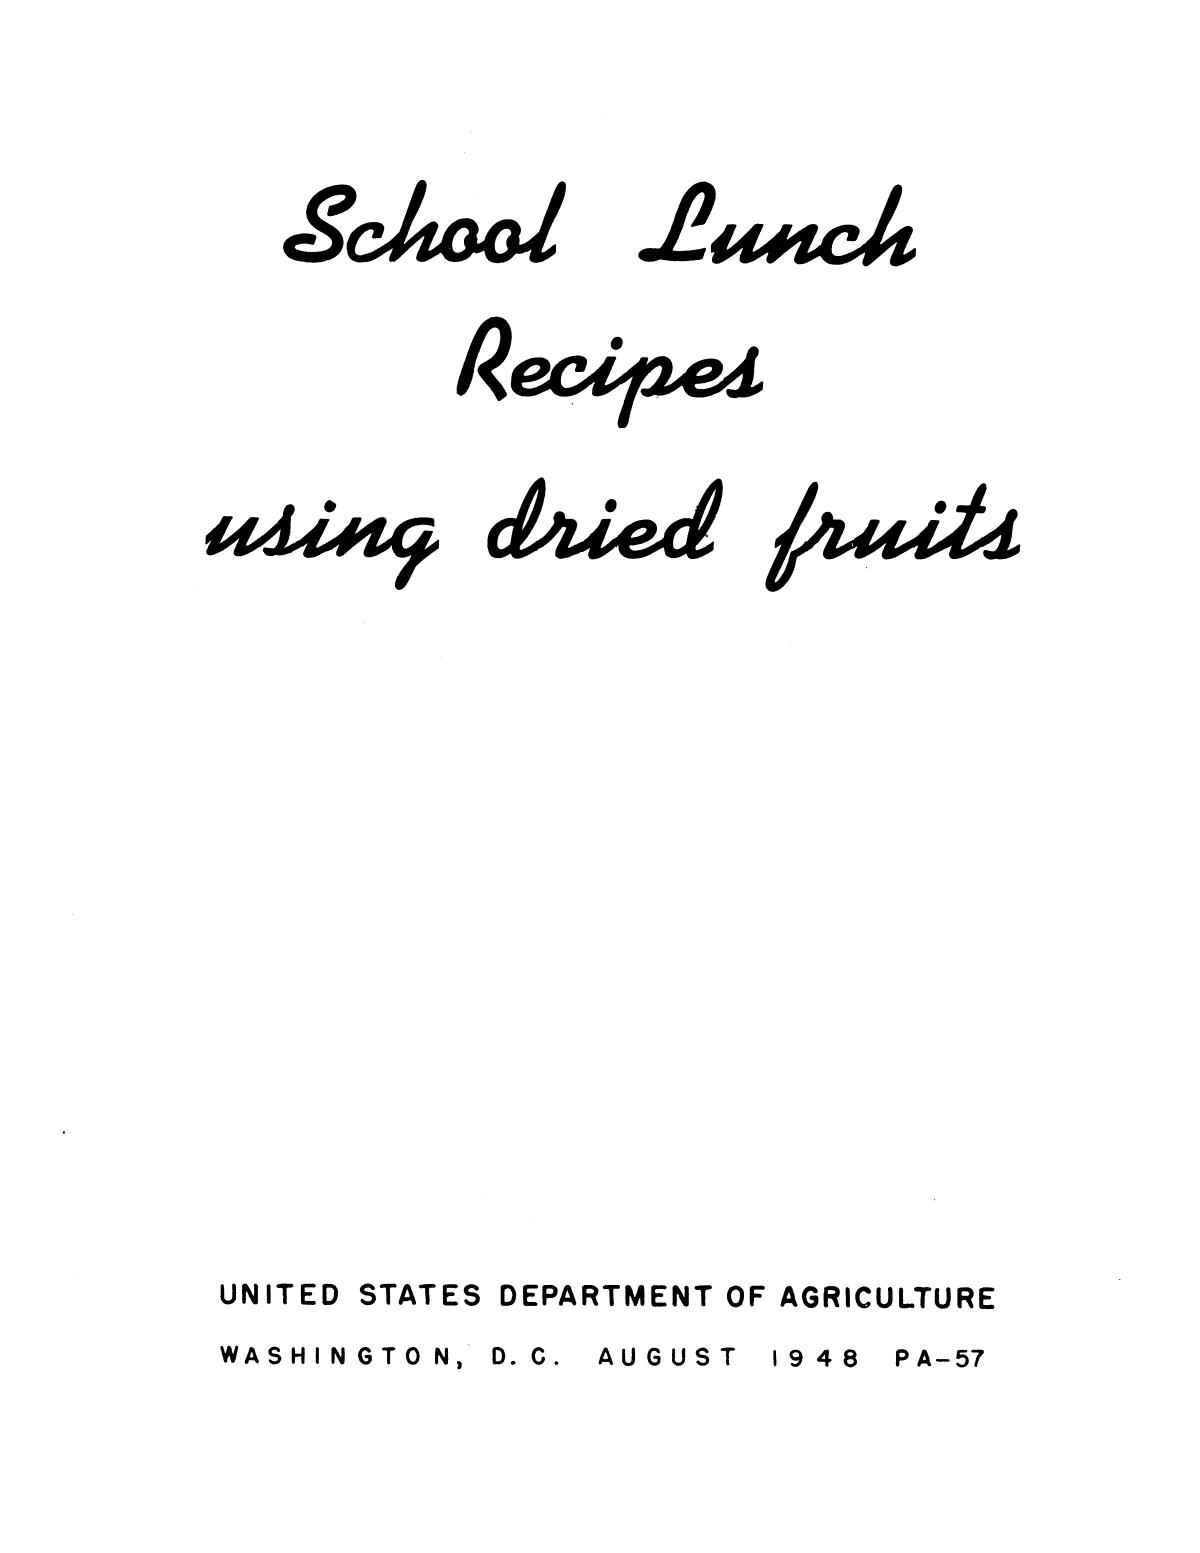 School lunch recipes using dried fruits. - Page Front Cover - UNT ...